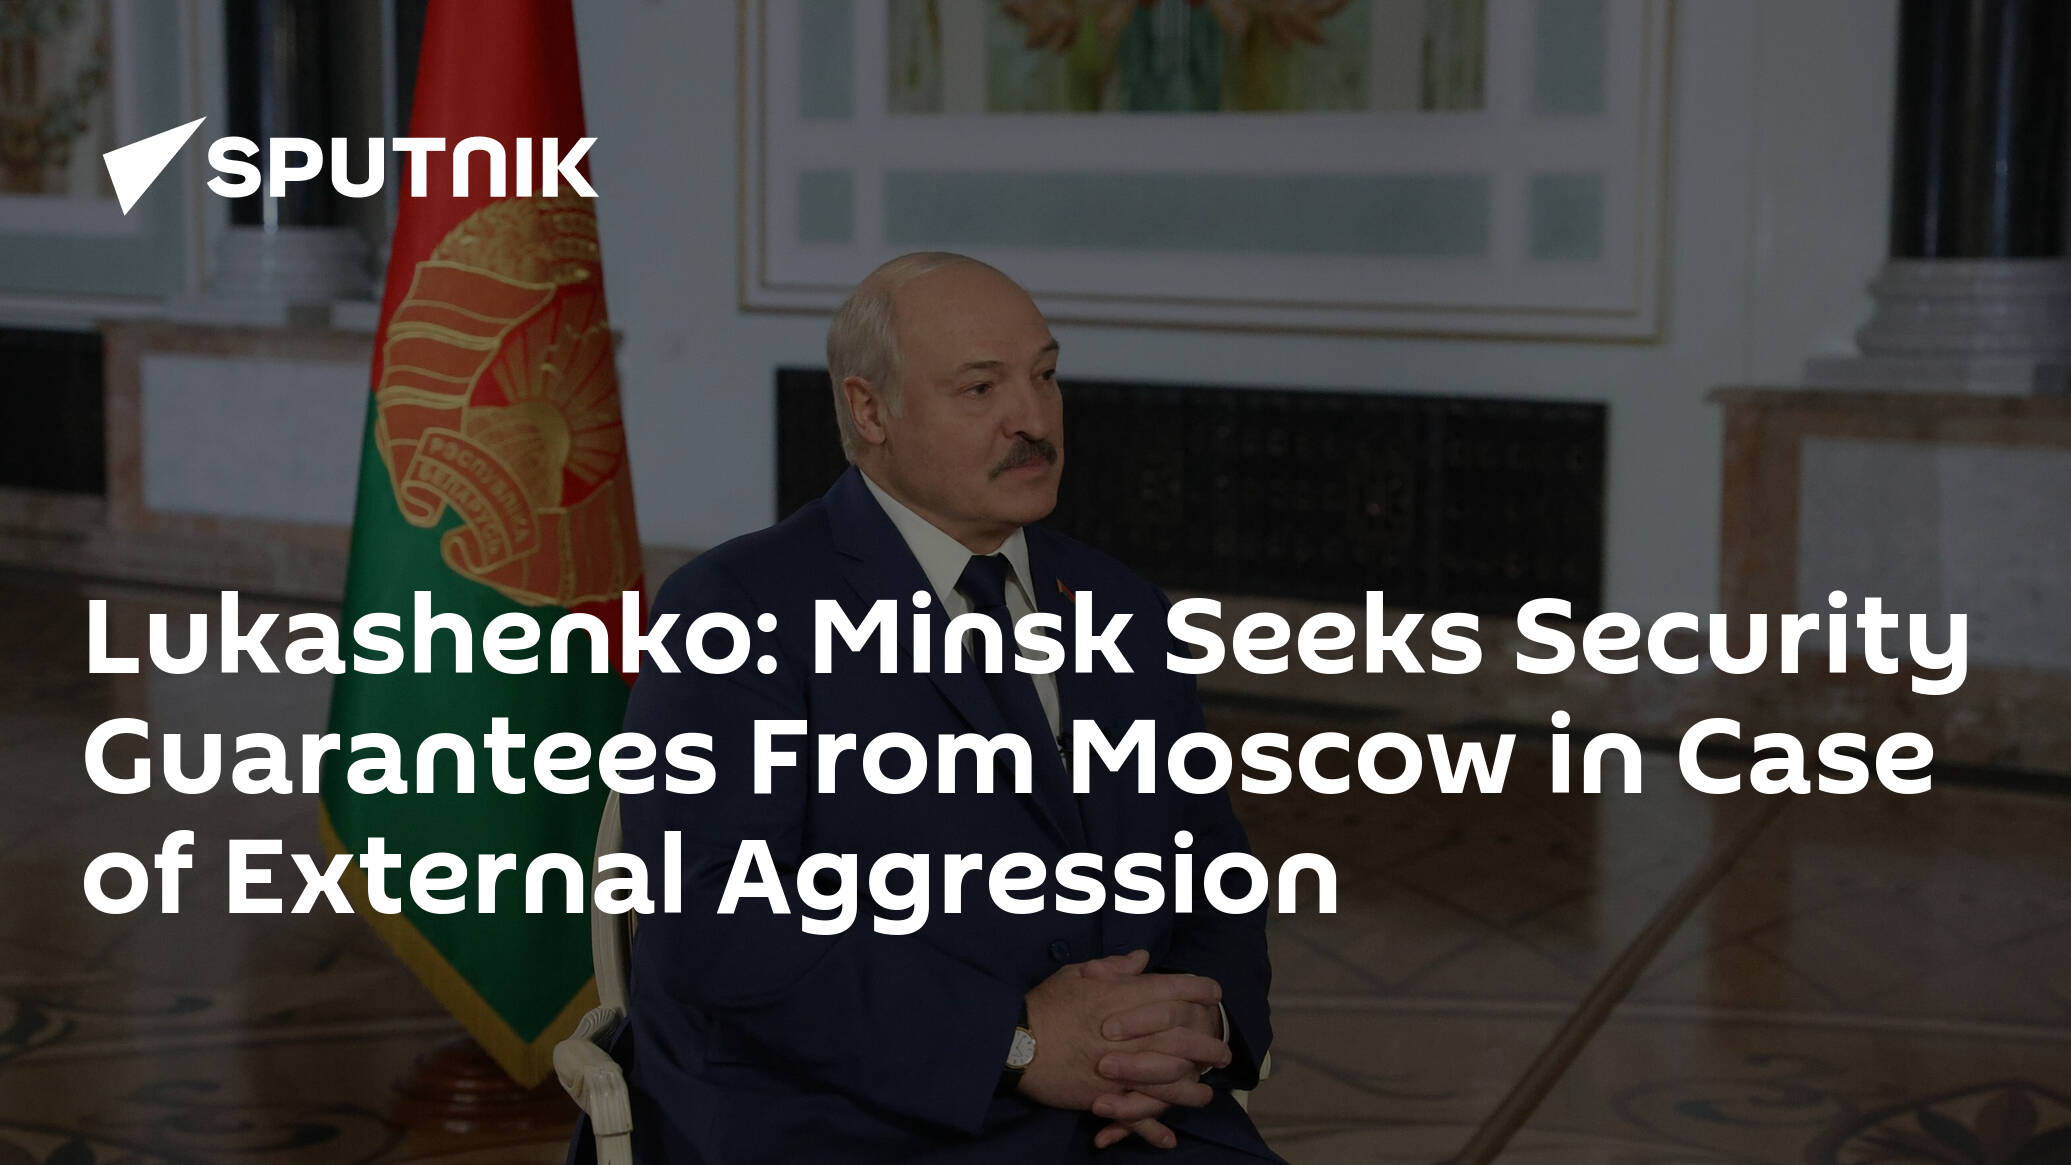 Lukashenko: Minsk Seeks Security Guarantees From Moscow in Case of External Aggression